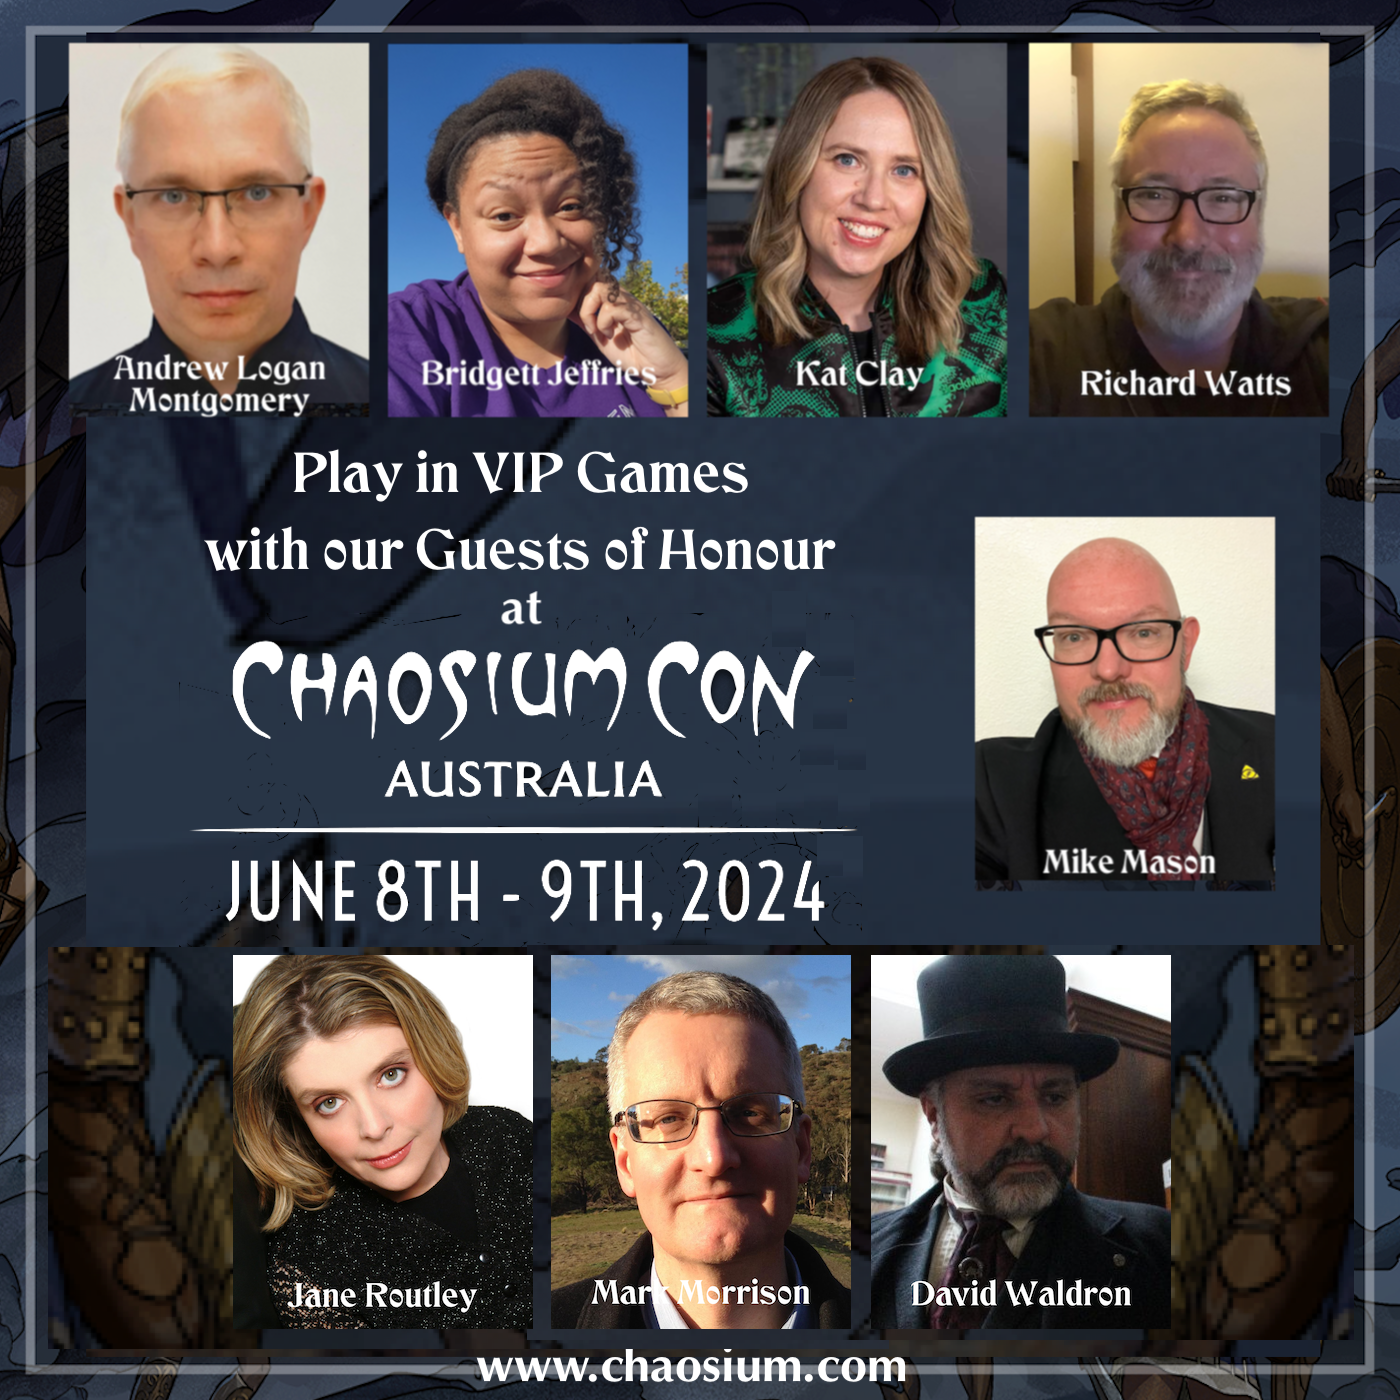 Guests of Honour at Chaosium Con Australia